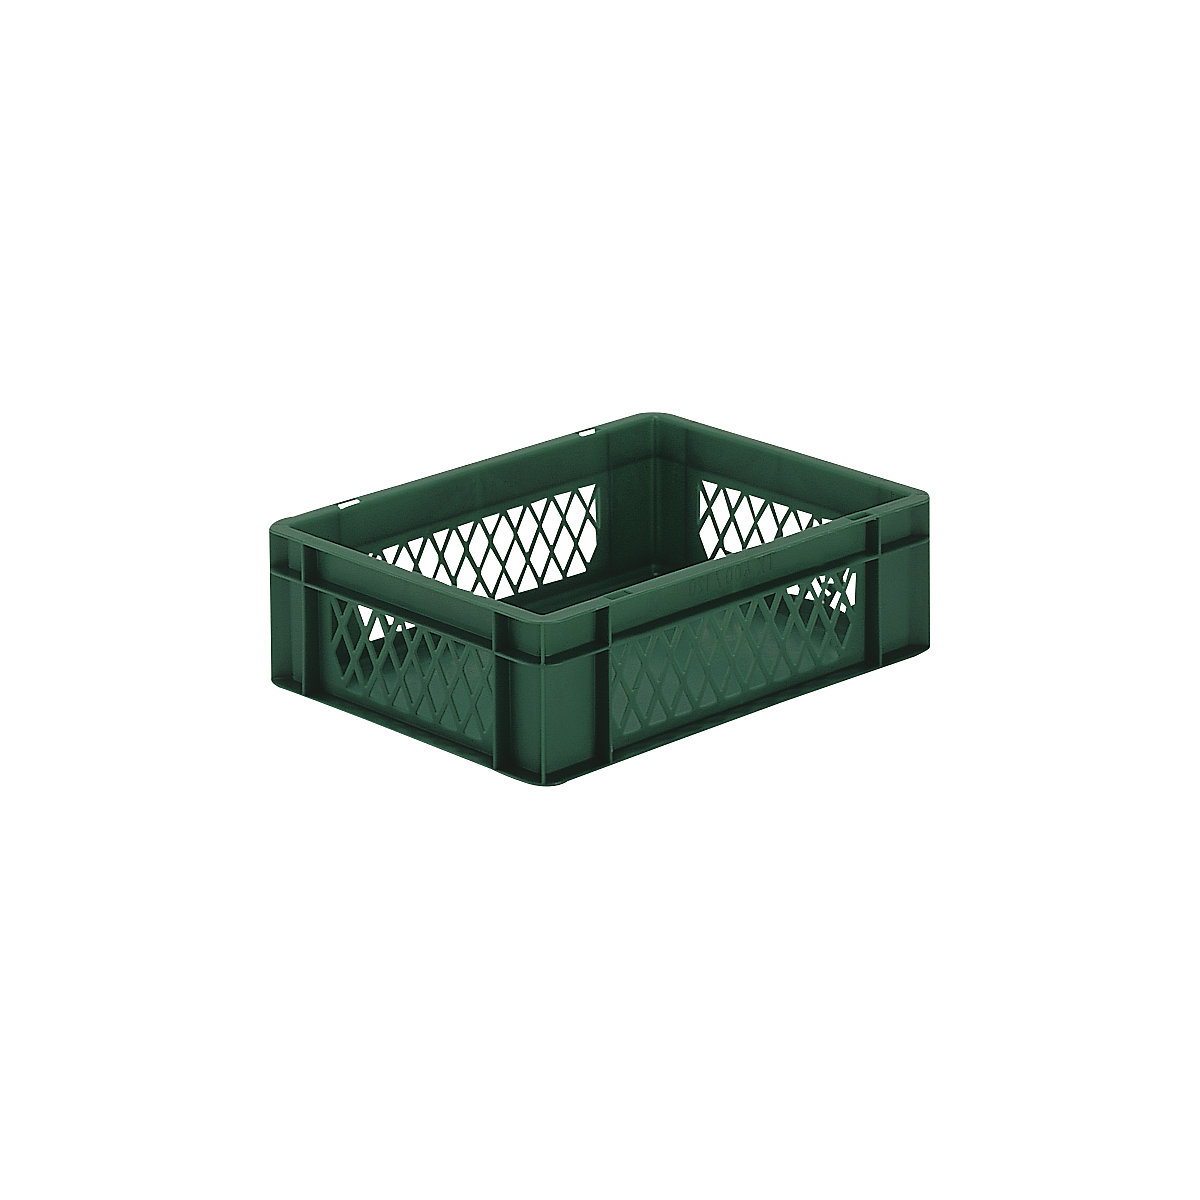 Euro stacking container, perforated walls, closed base, LxWxH 400 x 300 x 120 mm, green, pack of 5-8